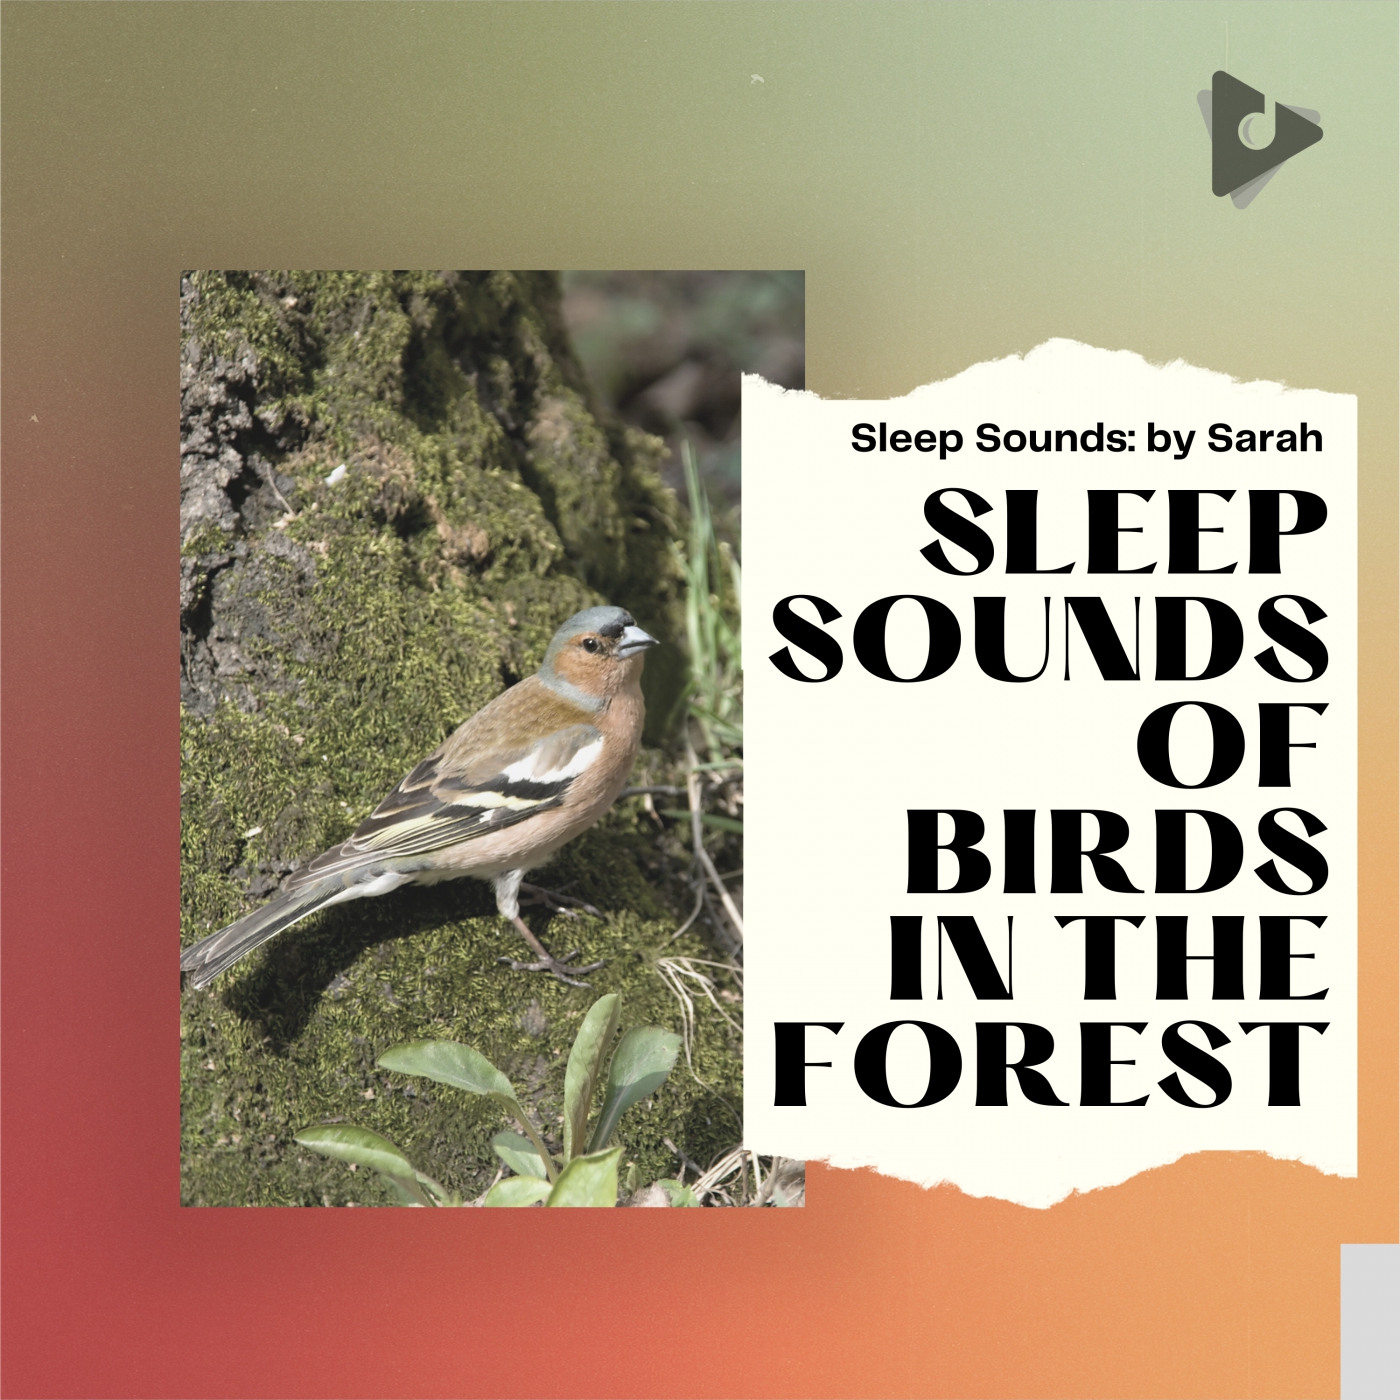 Sleep Sounds of Birds in the Forest